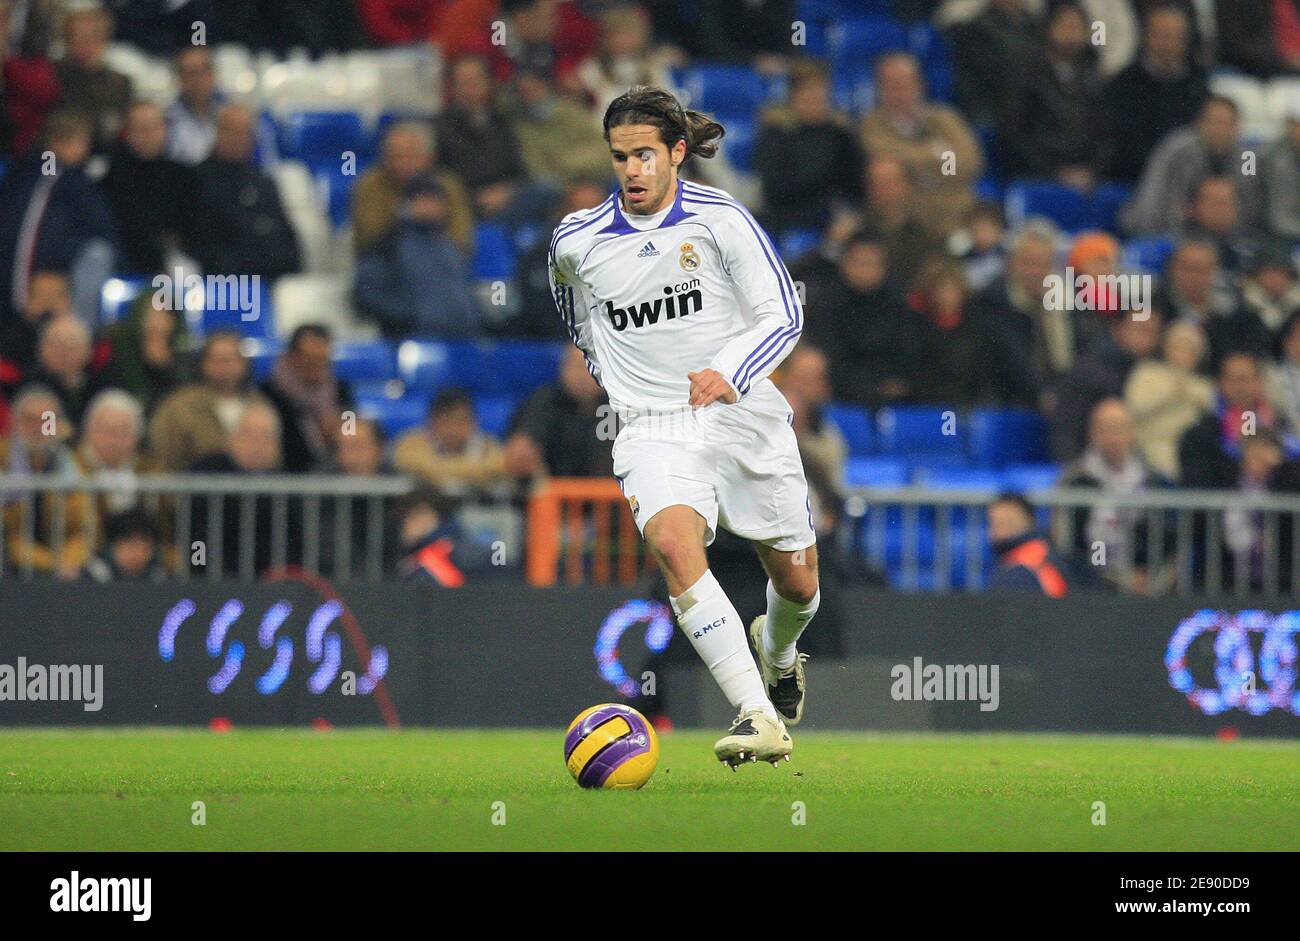 Real Madrid's Fernando Gago in action during the Spanish League soccer match between Real Madrid and Racing Santander at the Santiago Bernabeu Stadium in Madrid, Spain on December 1, 2007. Real won 3-1. Photo by Christian Liewig/ABACAPRESS.COM Stock Photo